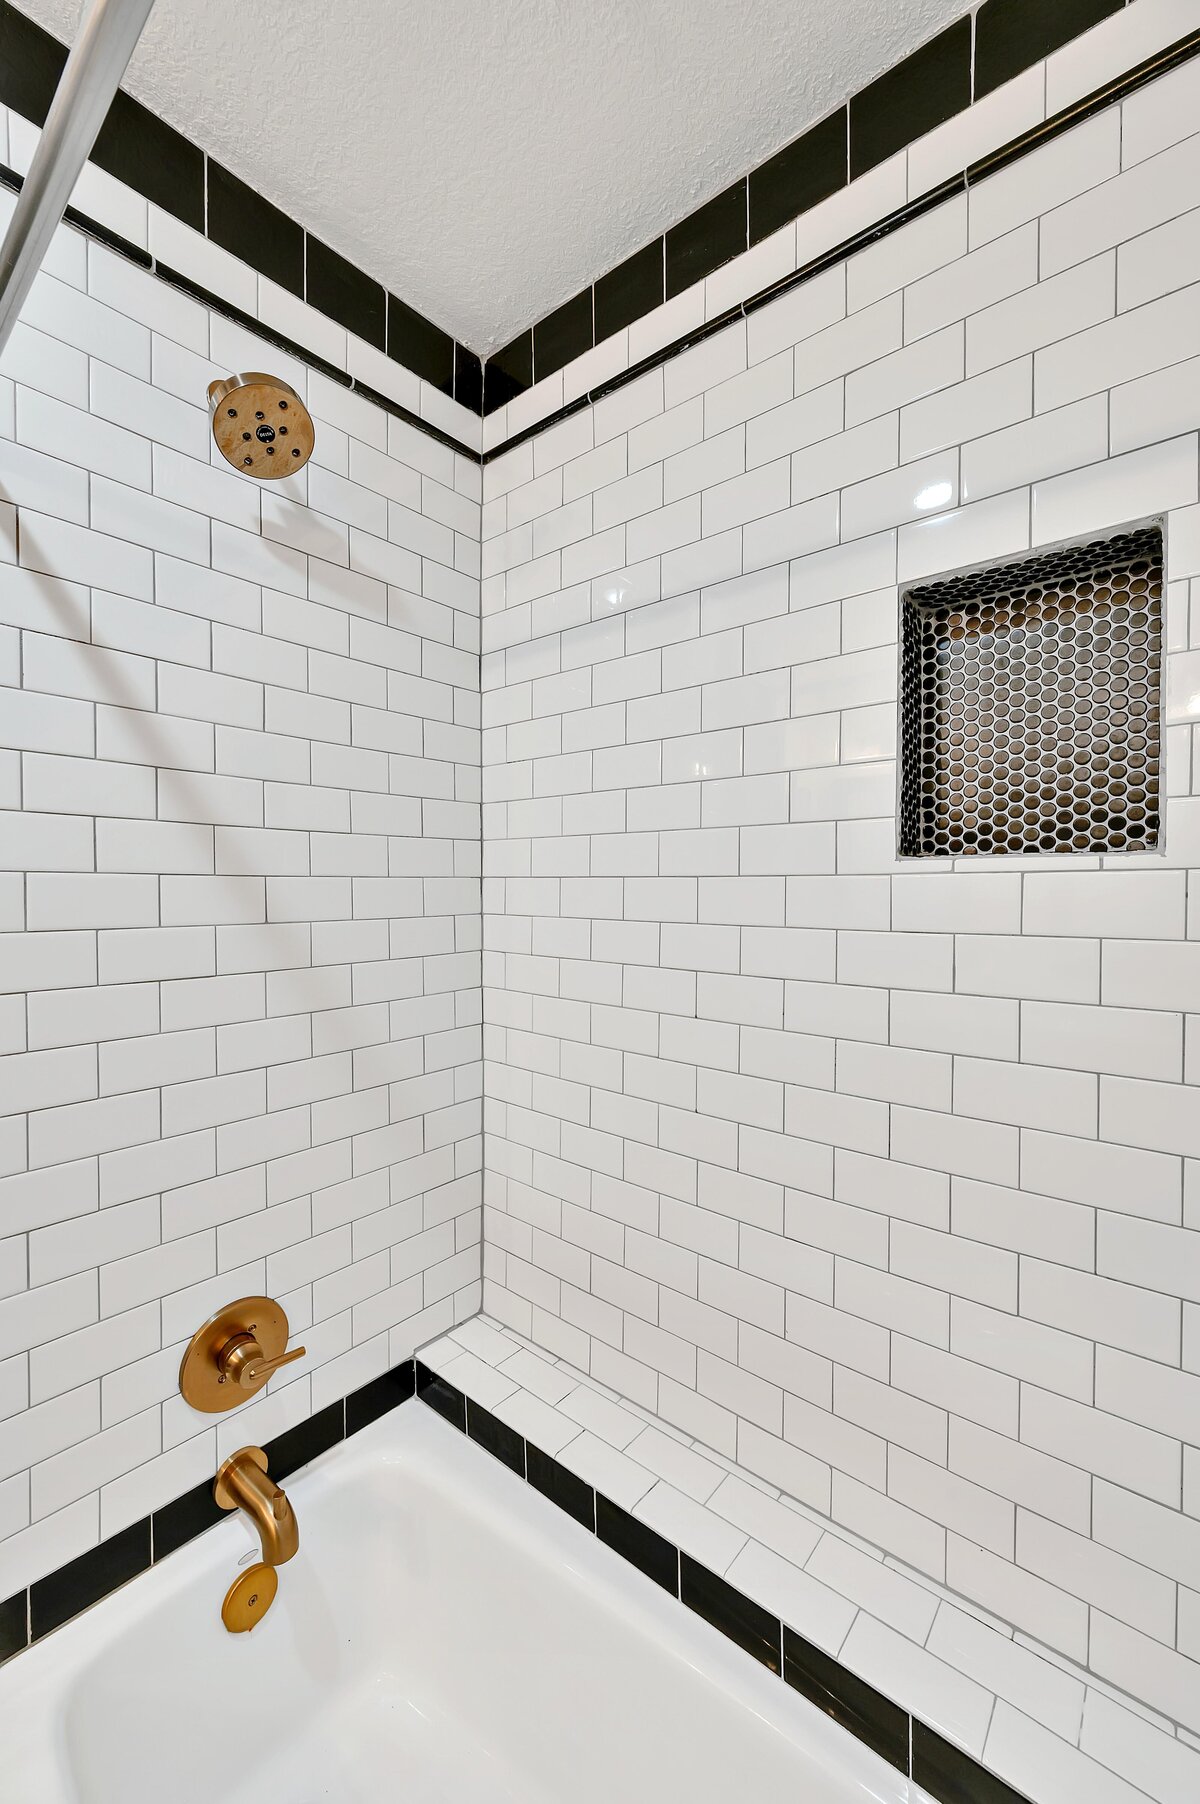 Tub/shower combo in the bathroom of this two-bedroom, two-bathroom vacation rental condo in the historic Behrens building in the heart of the Magnolia Silo District in downtown Waco, TX.